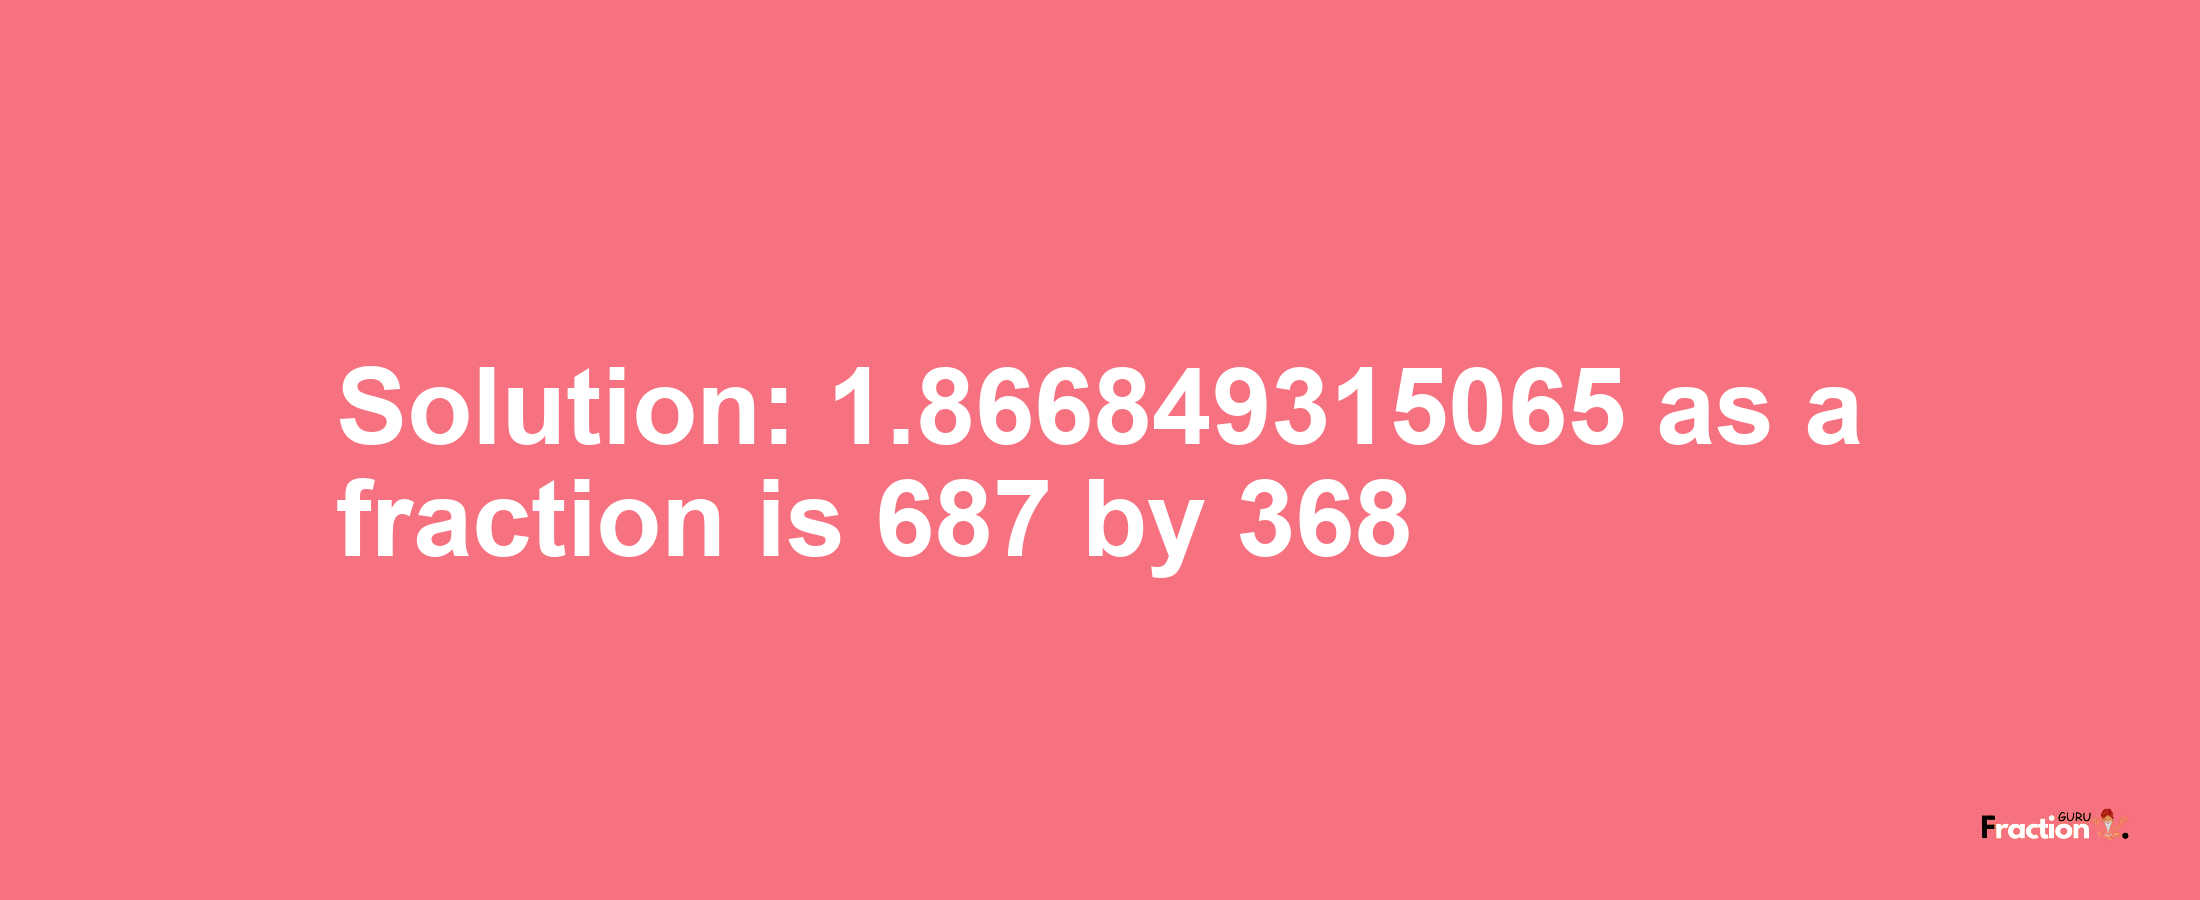 Solution:1.866849315065 as a fraction is 687/368